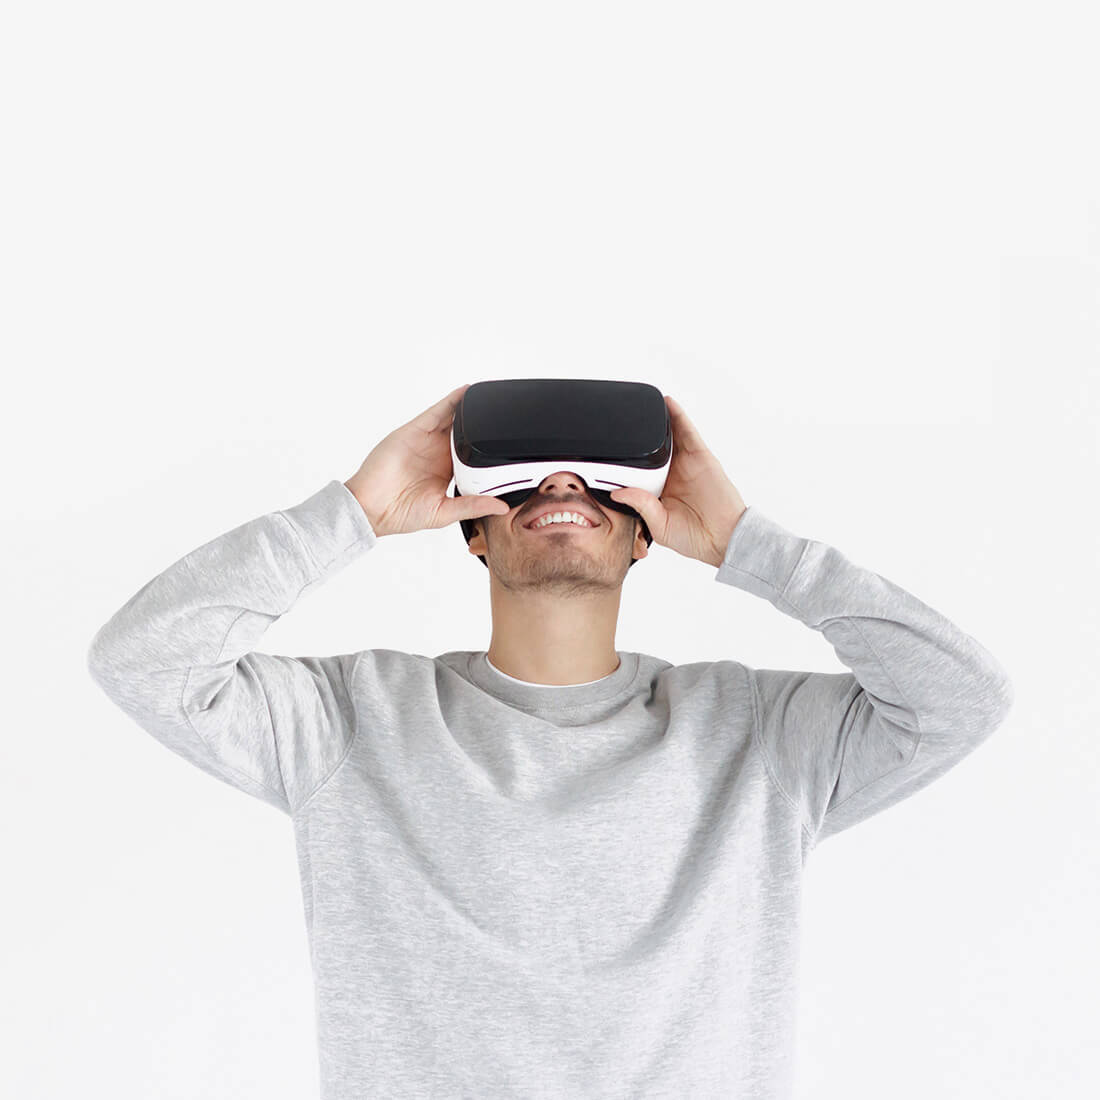 A man wearing a gray sweatshirt and holding a vr headset.